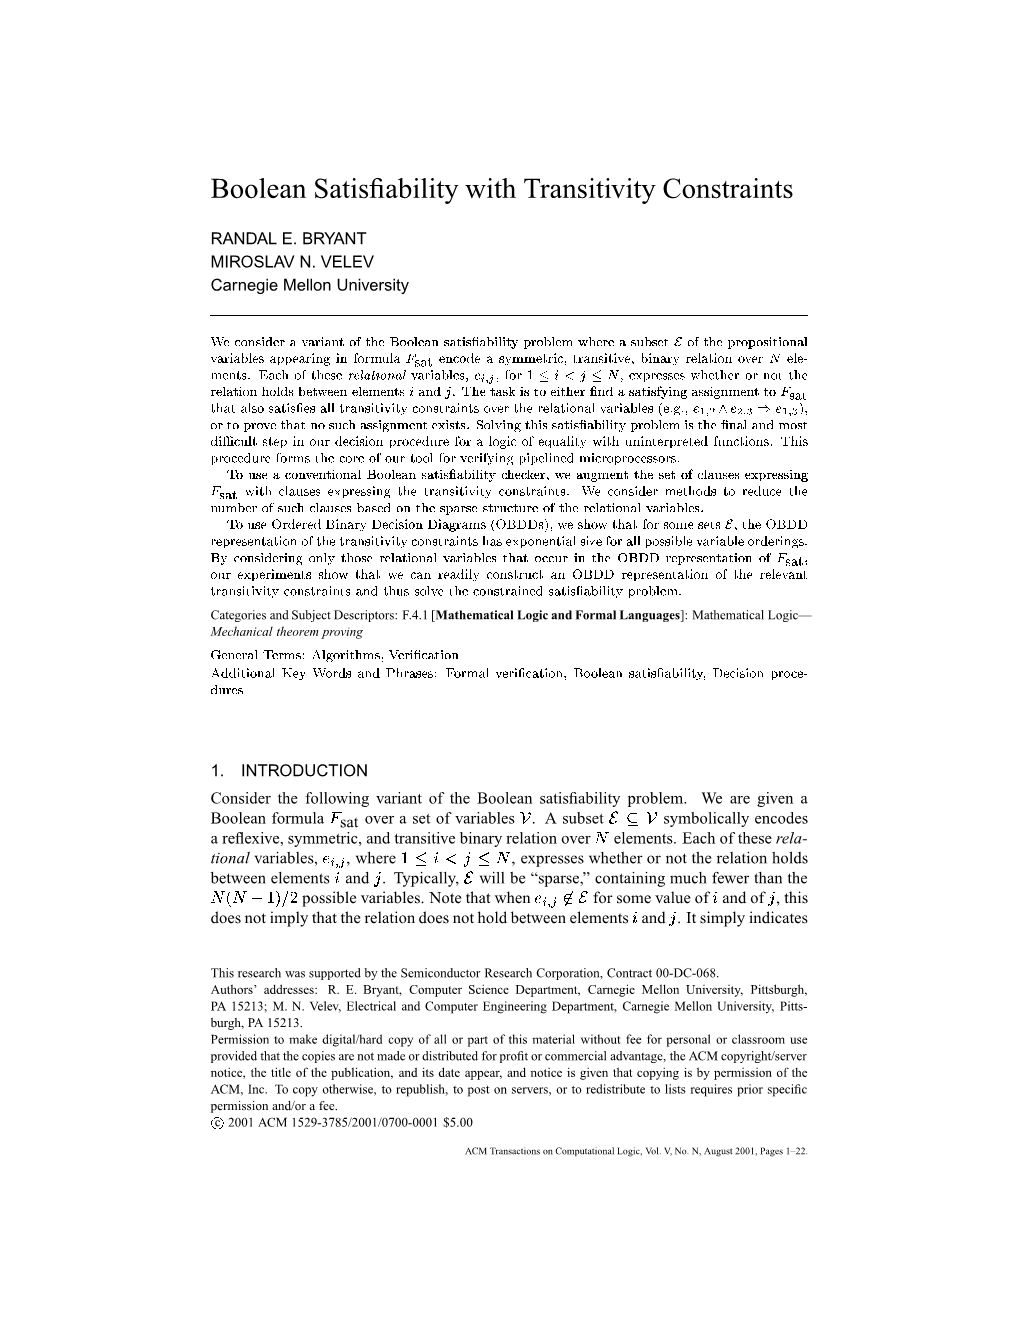 Boolean Satisfiability with Transitivity Constraints